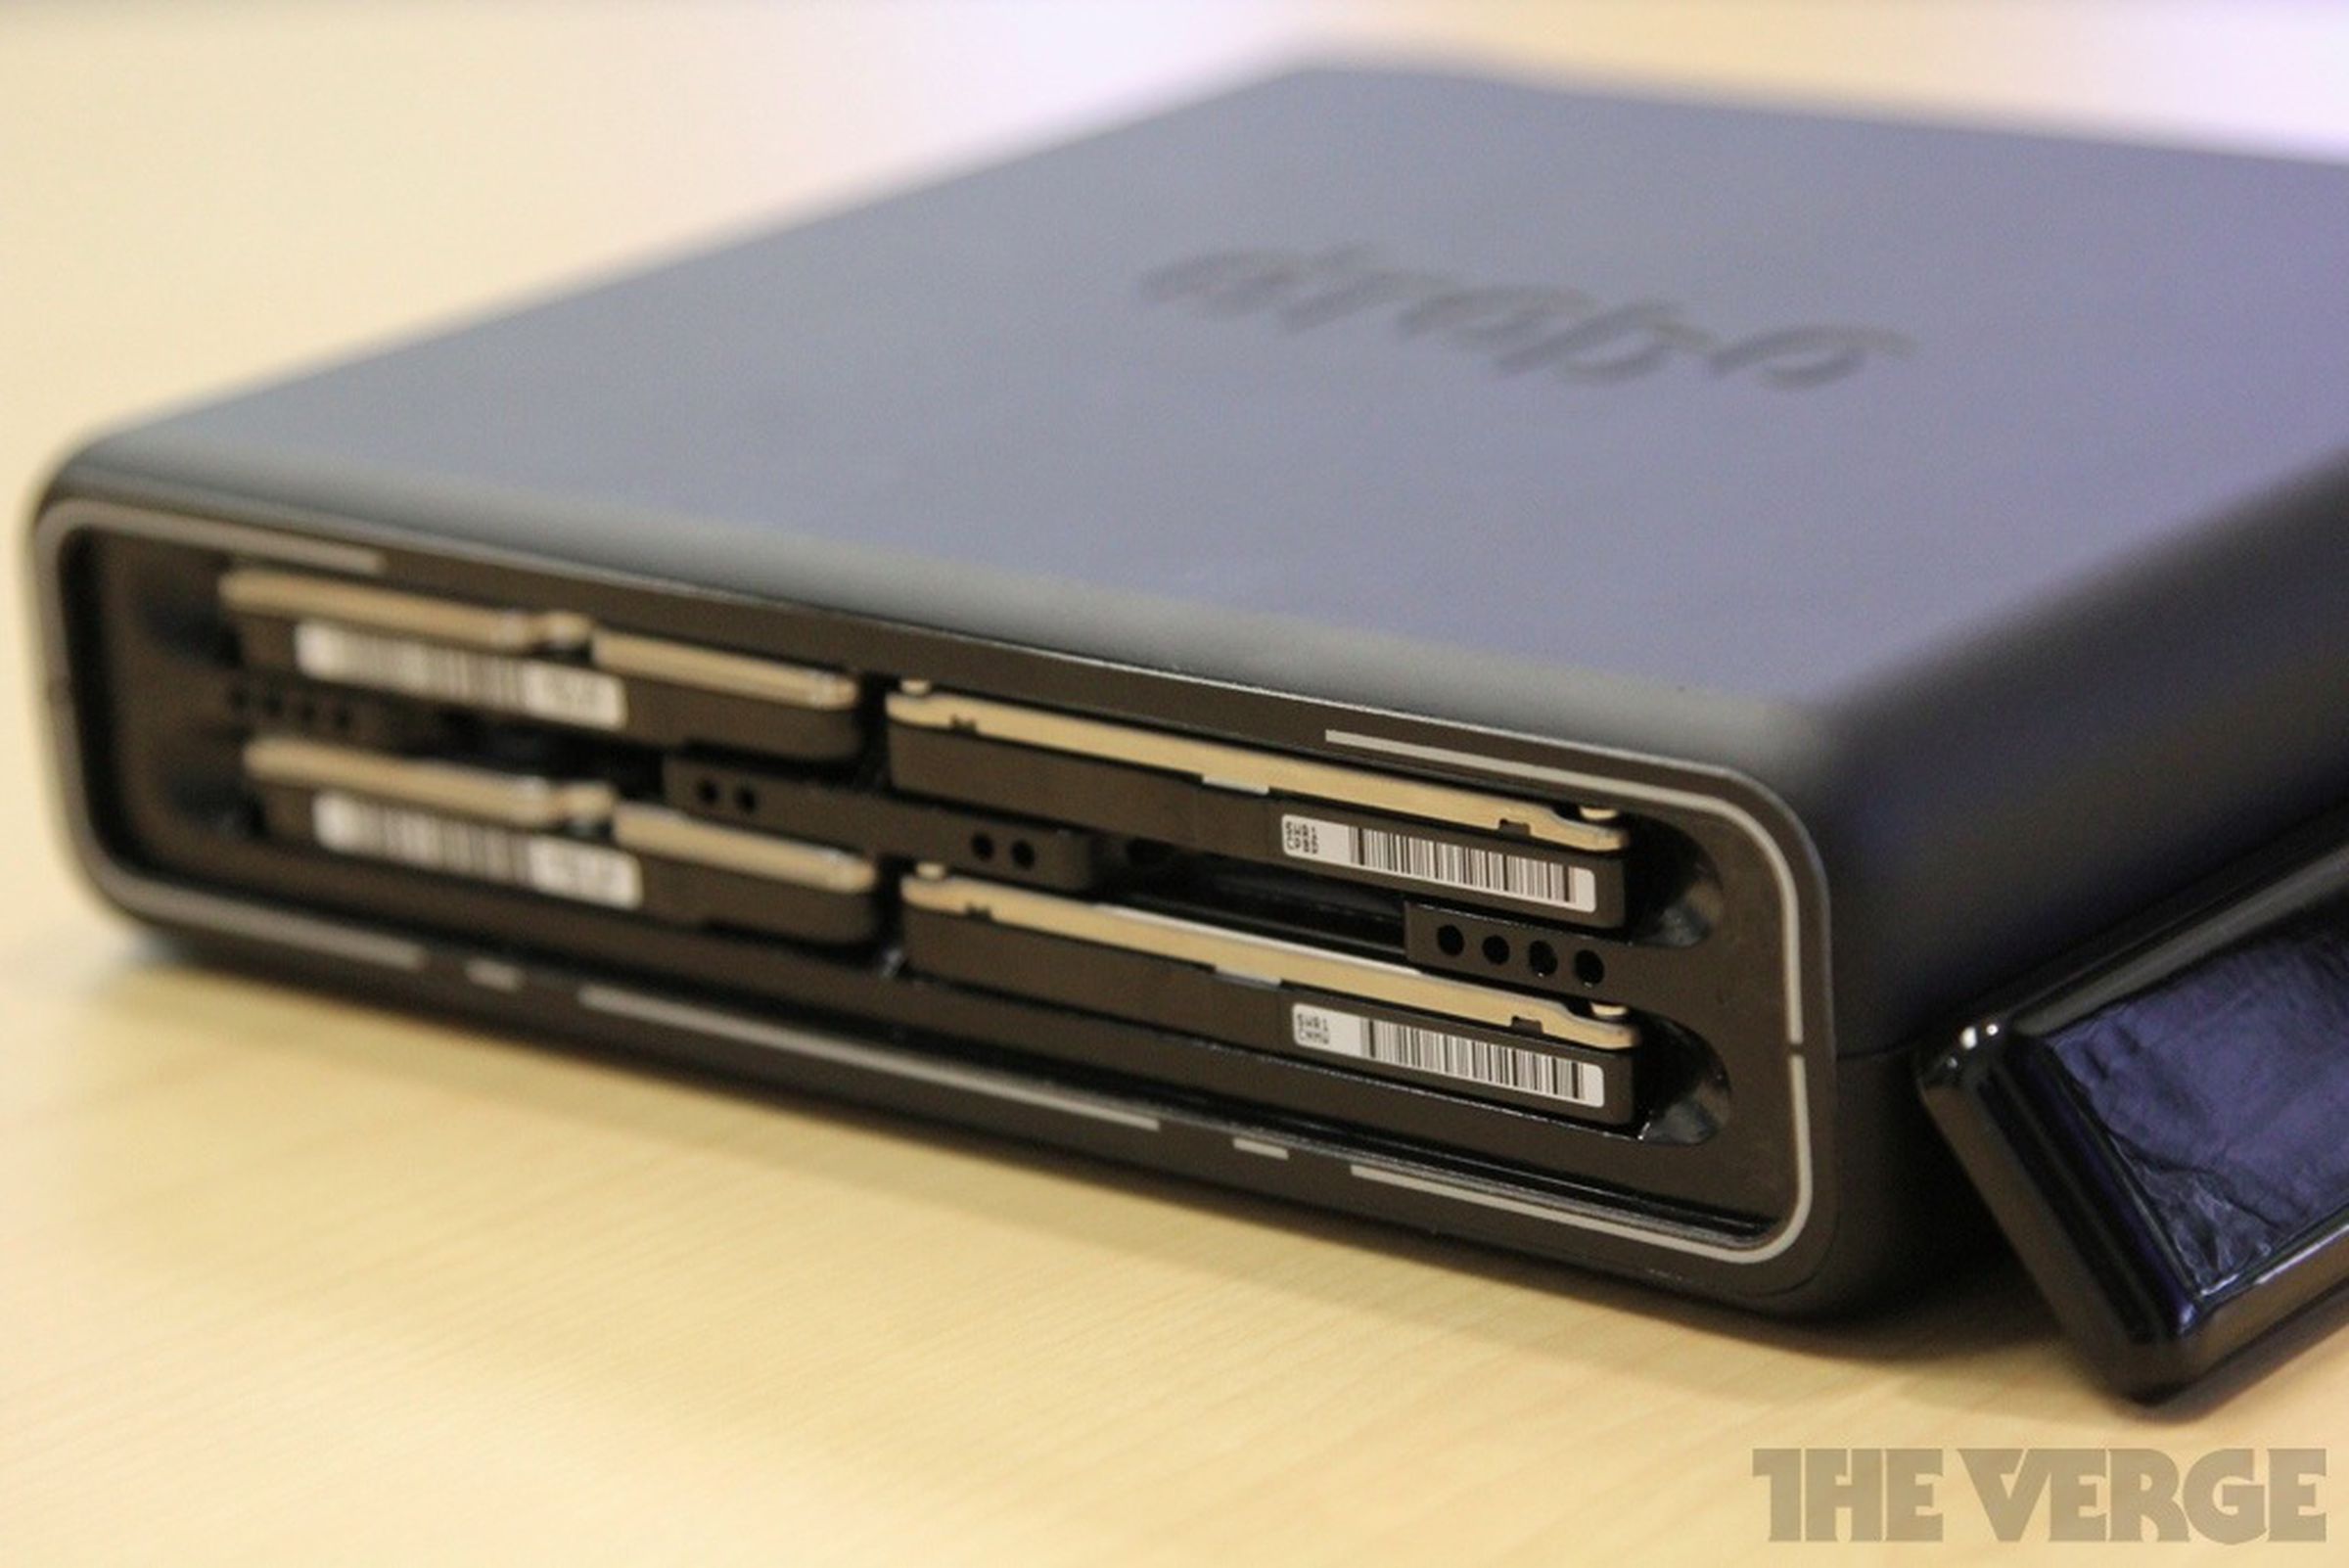 Drobo Mini and Drobo 5D hands-on pictures